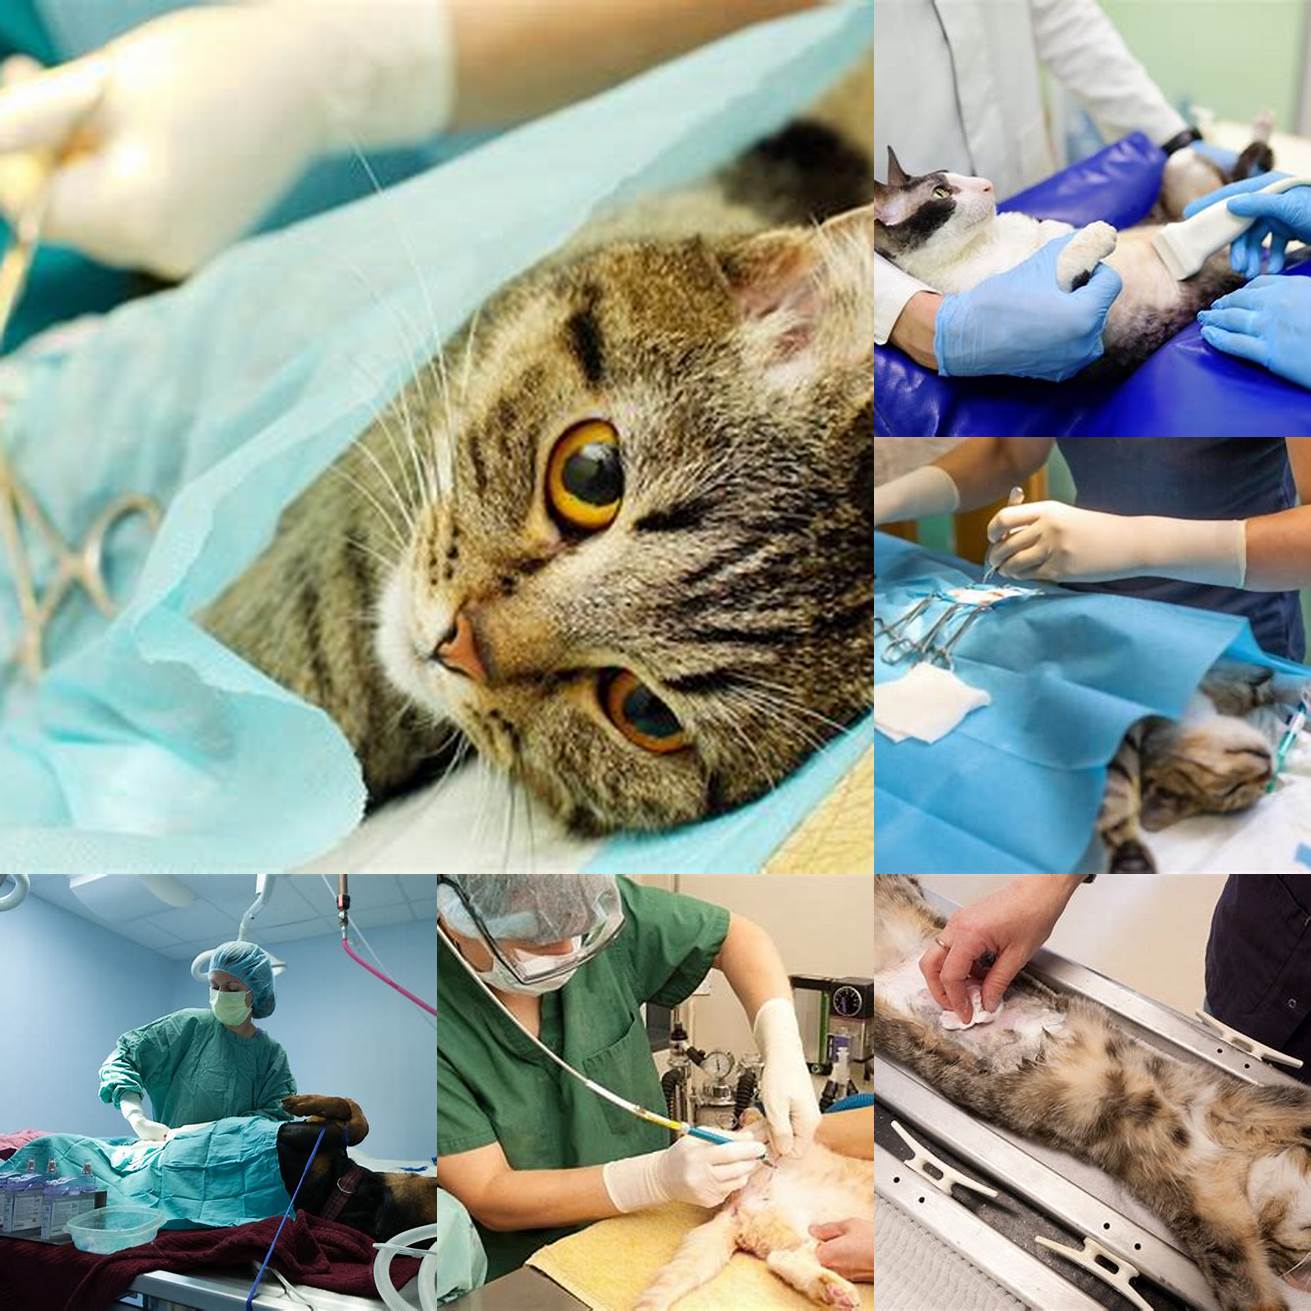 Surgical procedures including spaying and neutering